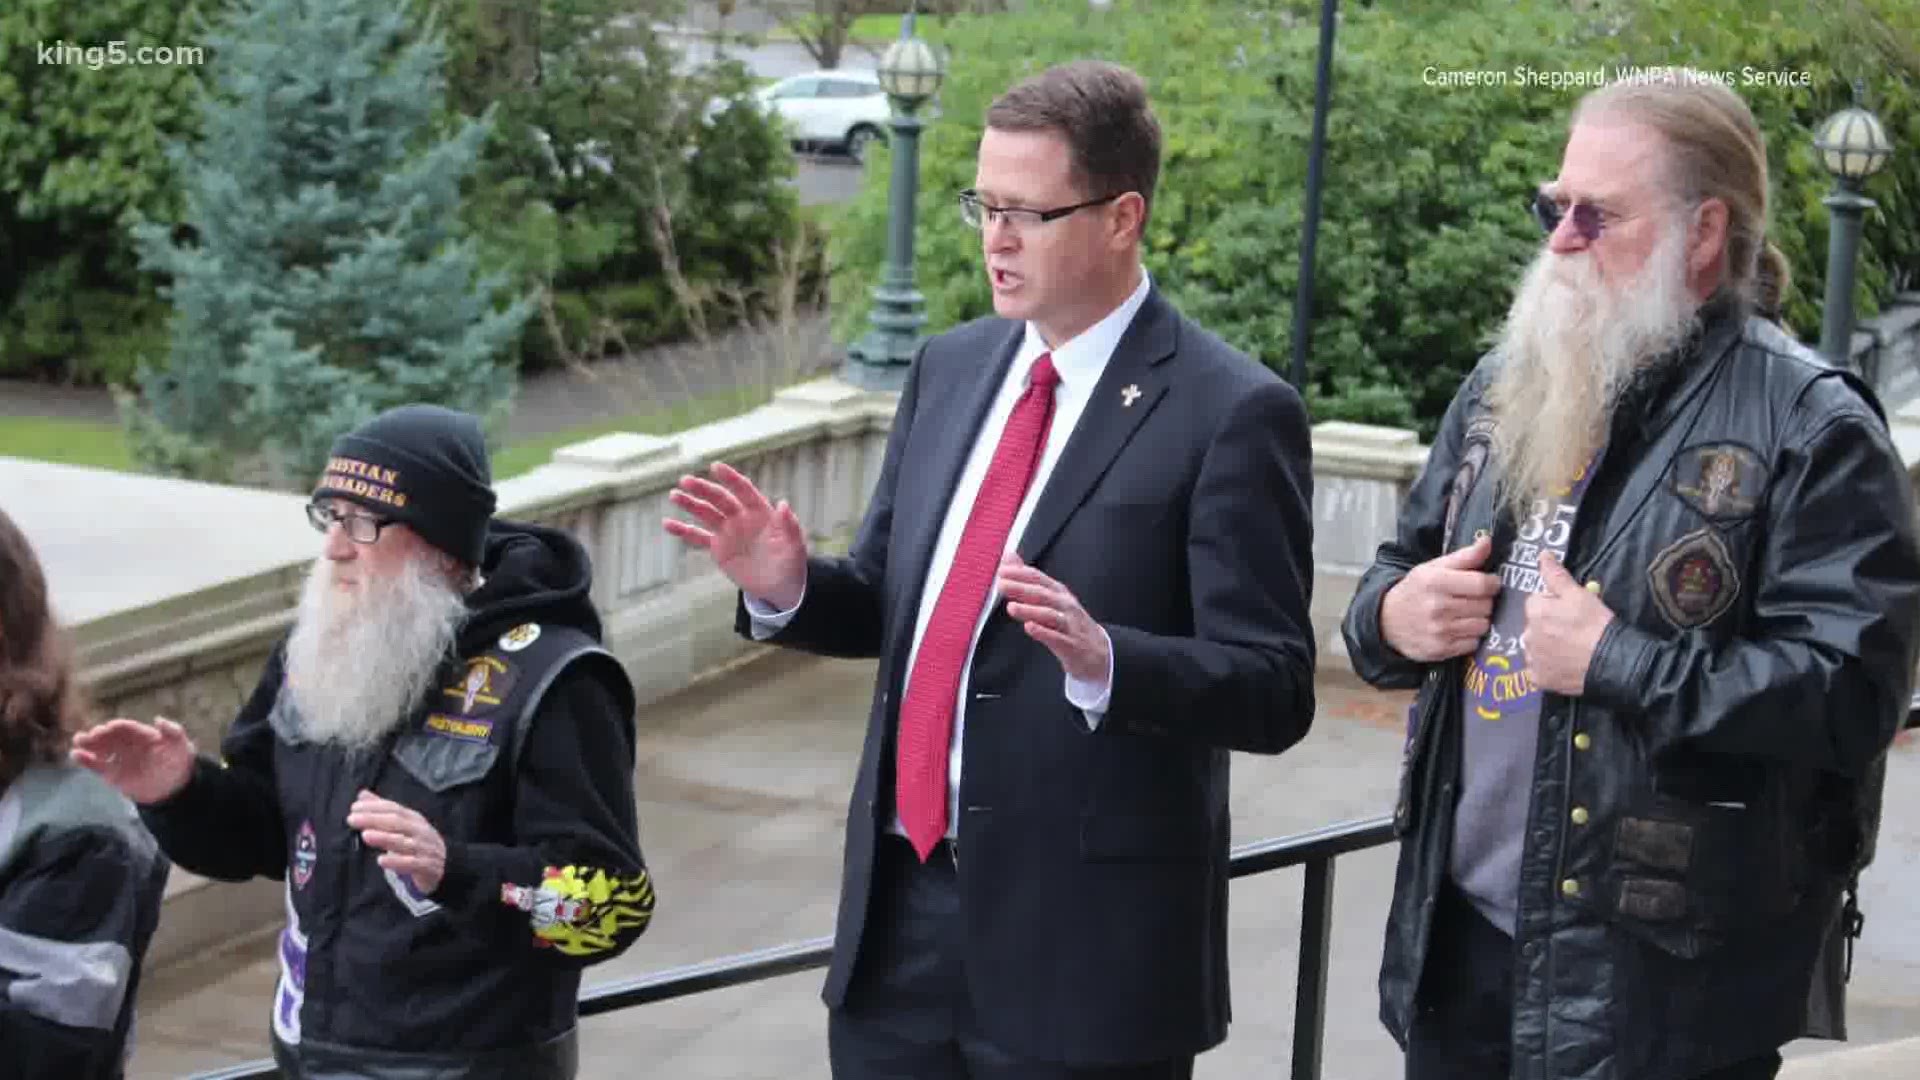 Washington state Rep. Matt Shea is accused of damaging the Capitol steps in Olympia with olive oil during a counter-protest in March.